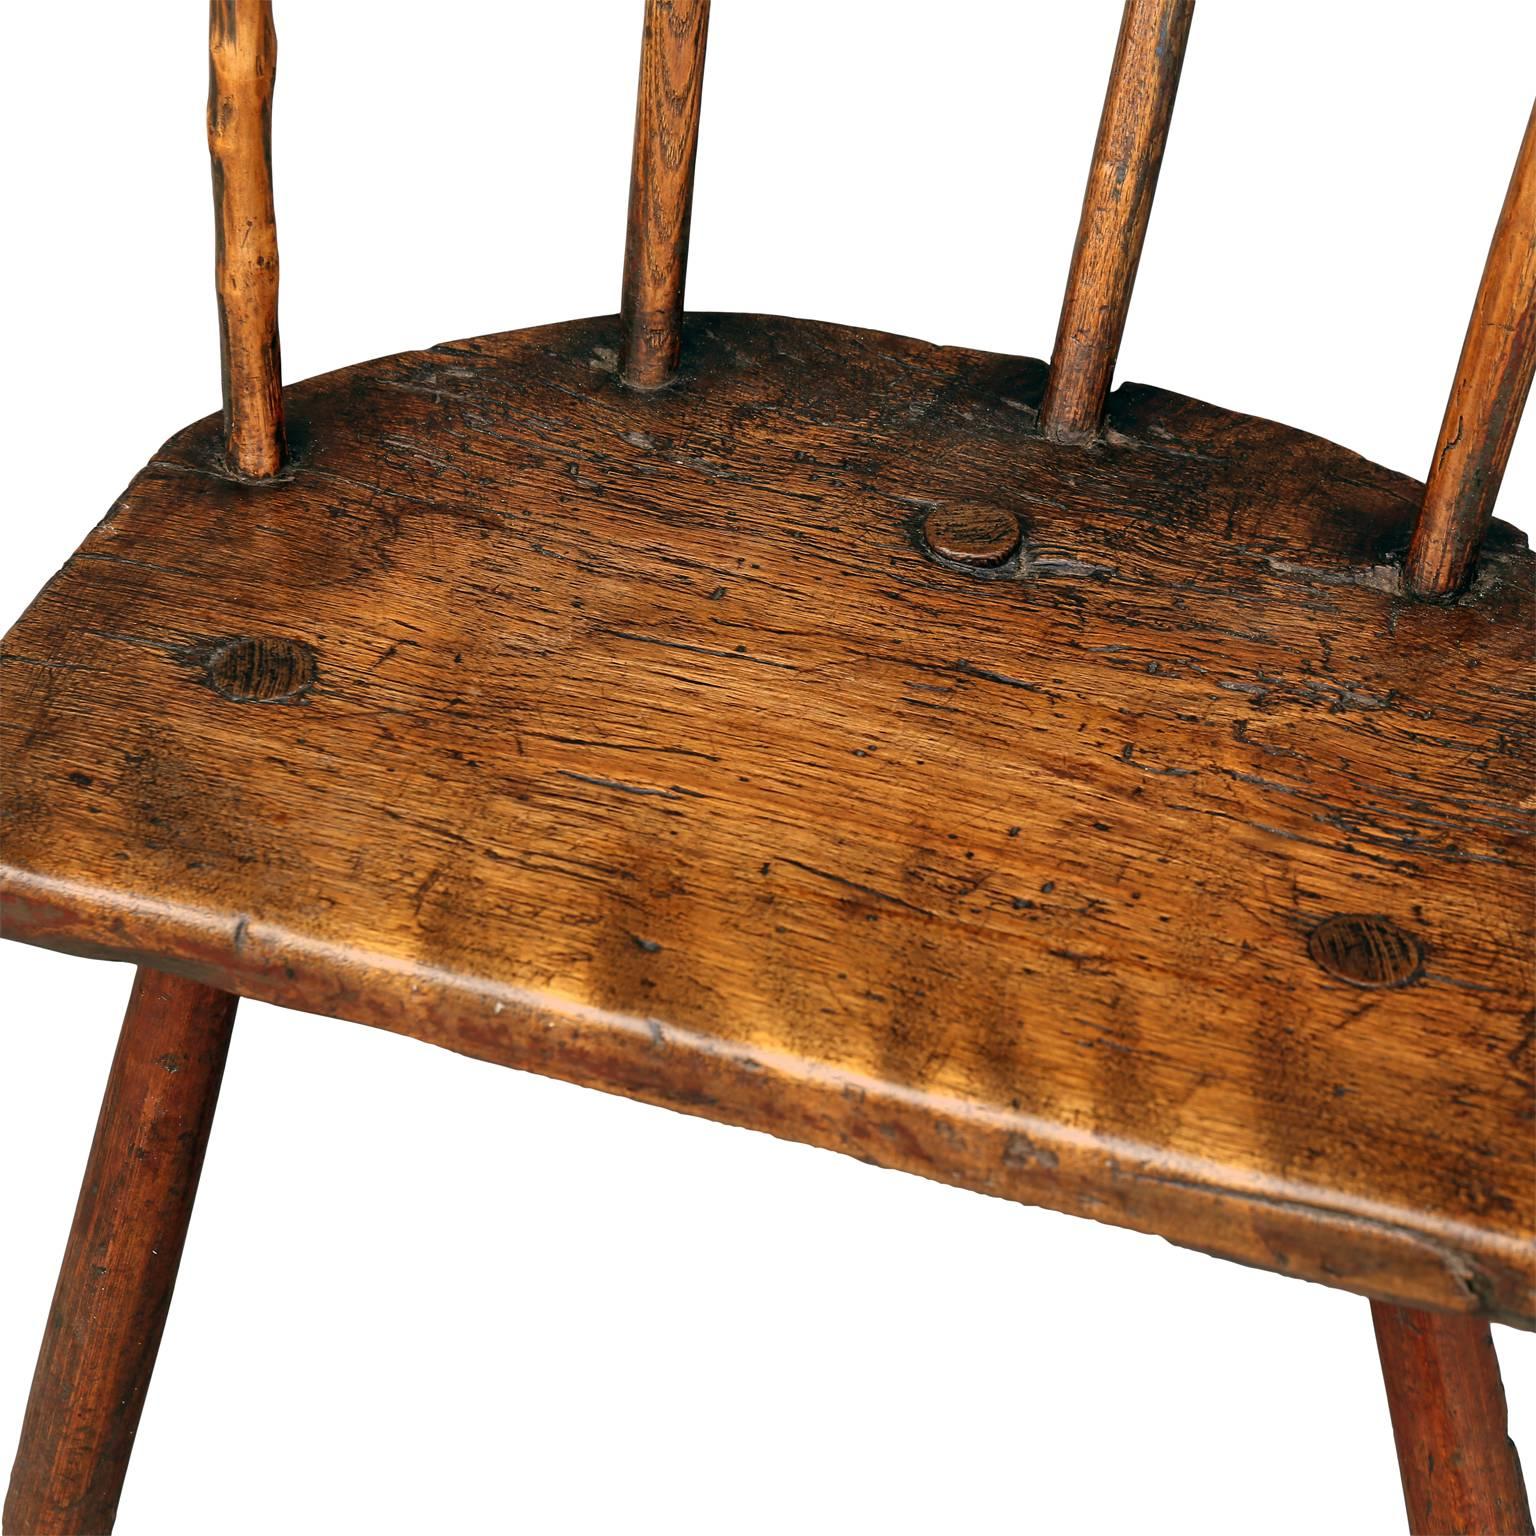 Ash Early 18th Century Stick Chair from Wales